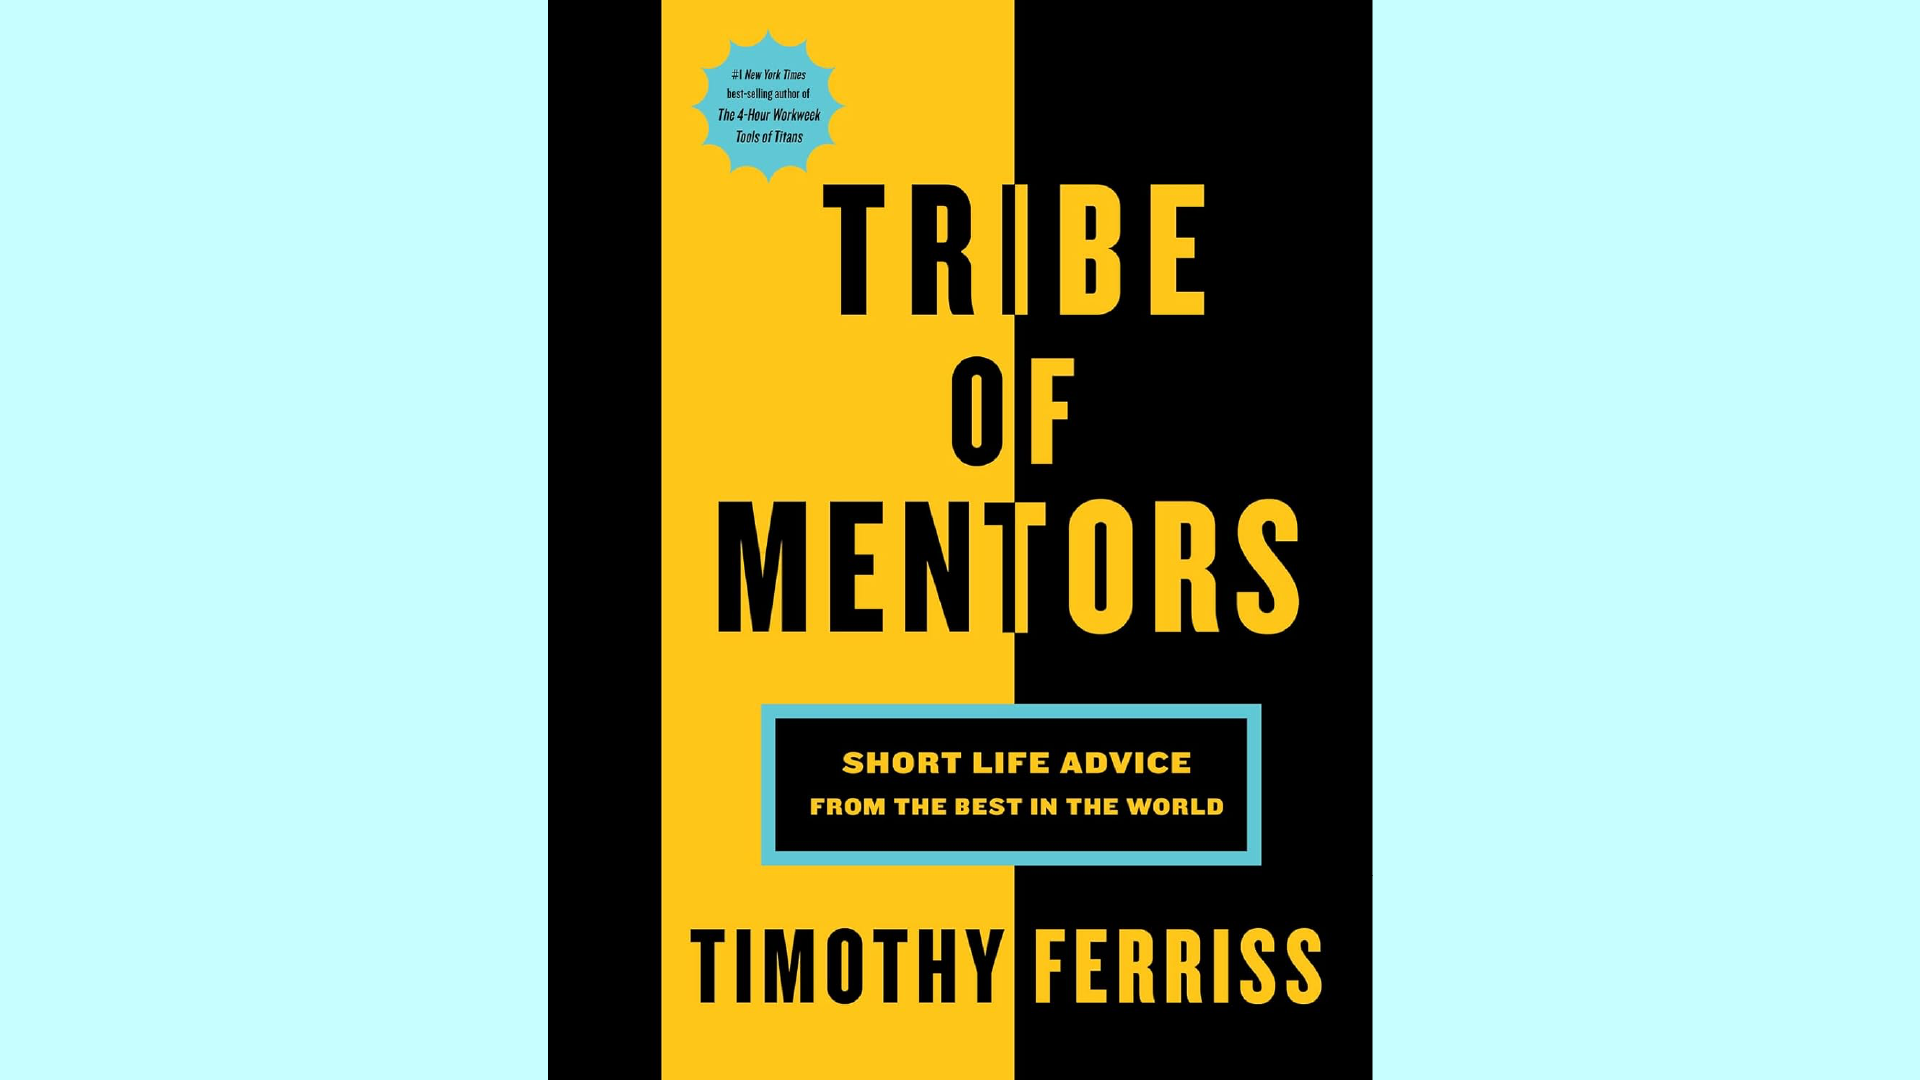 Summary: Tribe of Mentors by Tim Ferriss